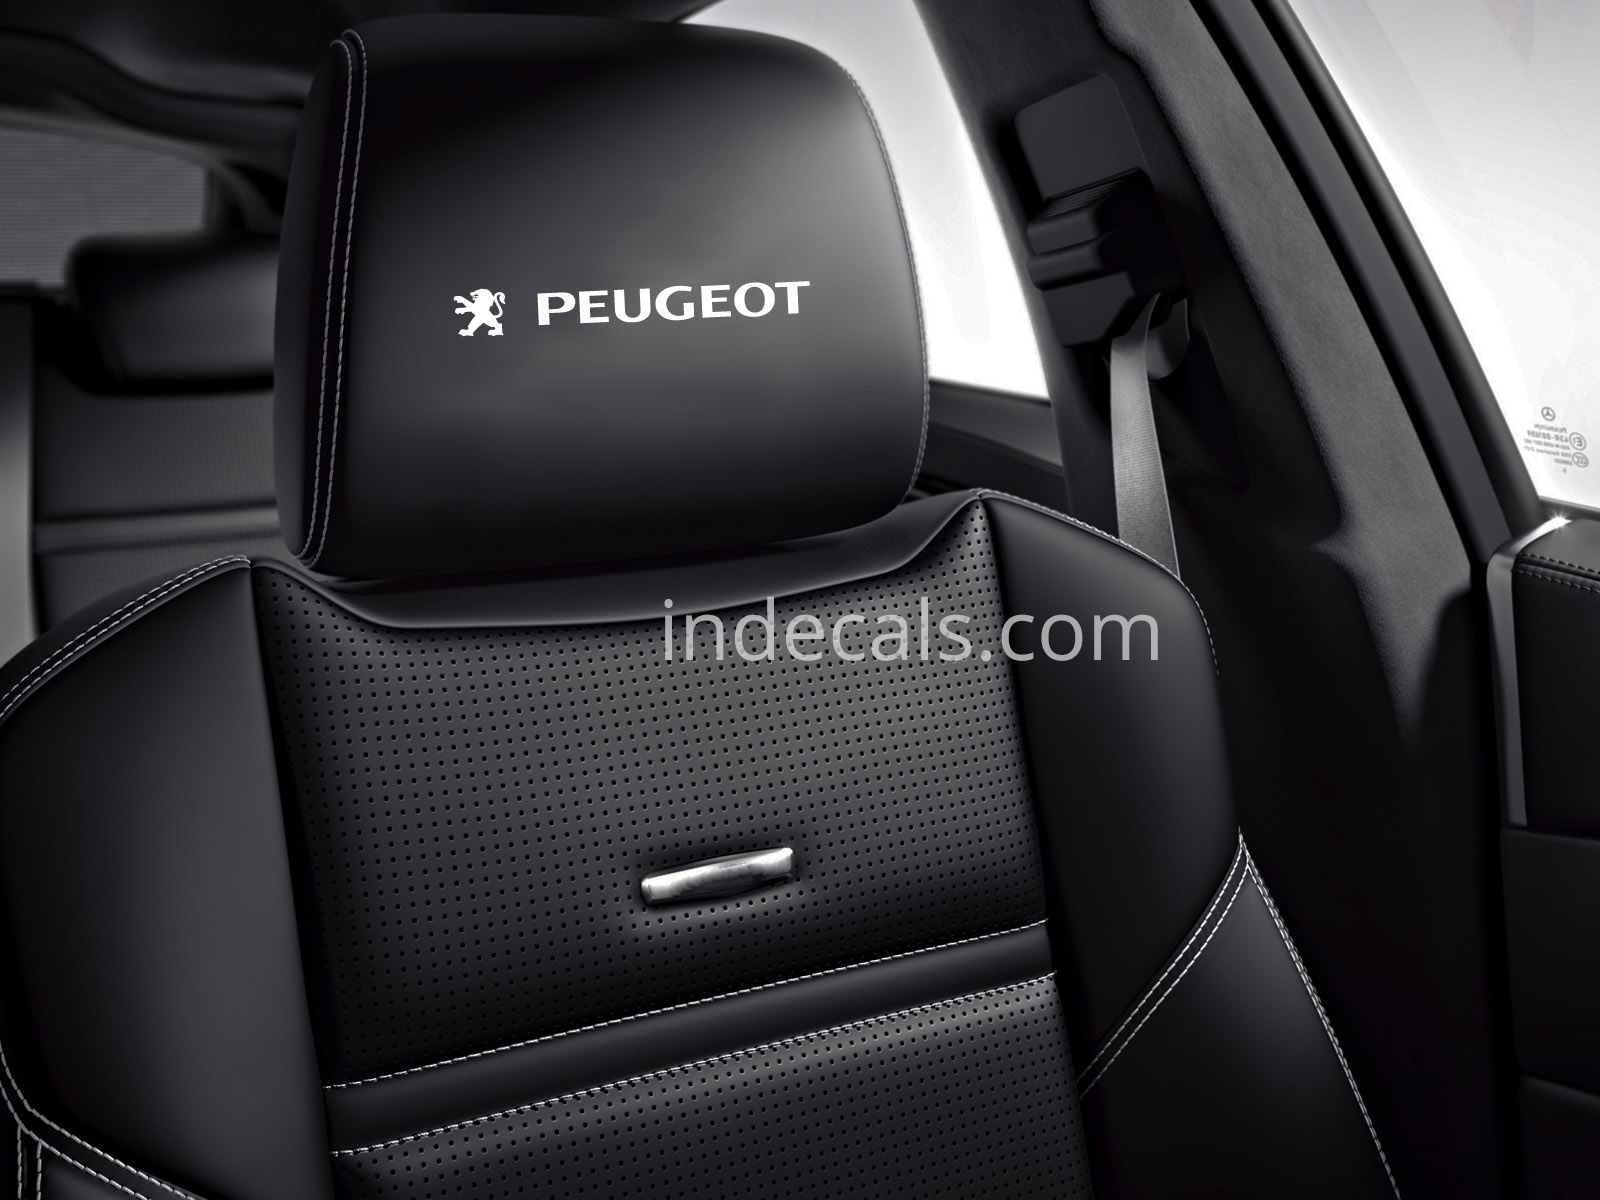 6 x Peugeot Stickers for Headrests - White